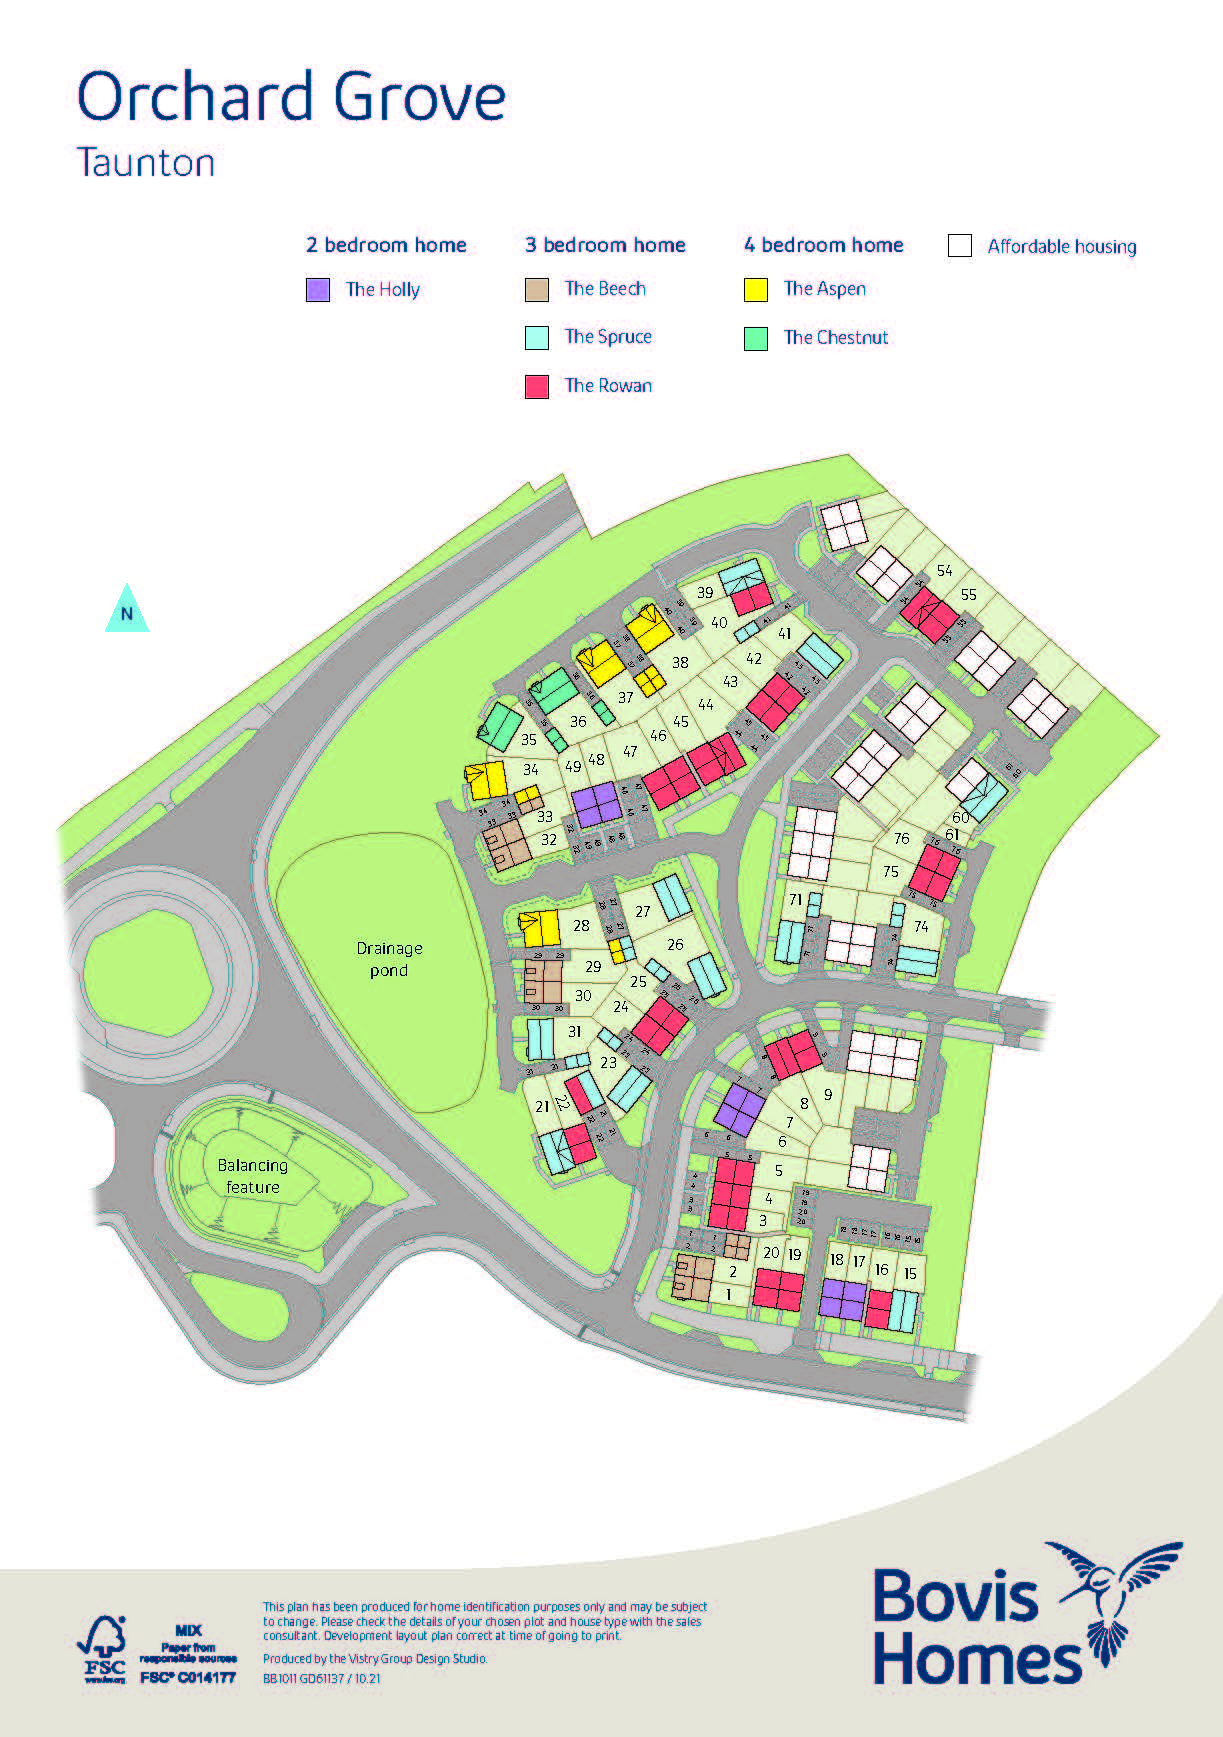 Orchard Grove New Homes Development - Site Layout